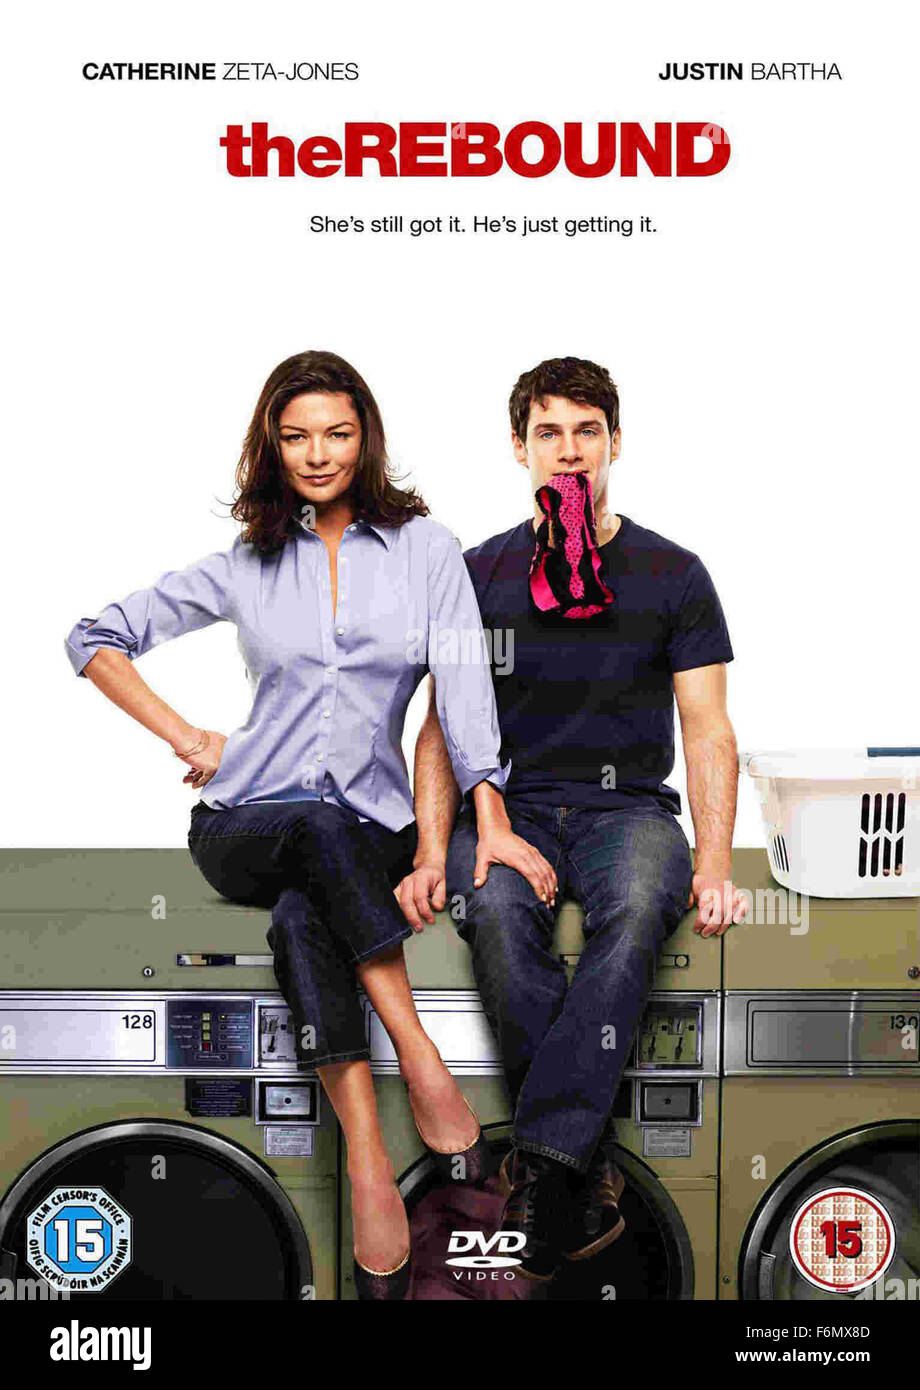 RELEASE DATE: December 25, 2010. MOVIE TITLE: The Rebound. STUDIO: The Film  Department. PLOT: In New York City, a single mom captivates her new  neighbor, a much younger man. PICTURED: CATHERINE ZETA-JONES